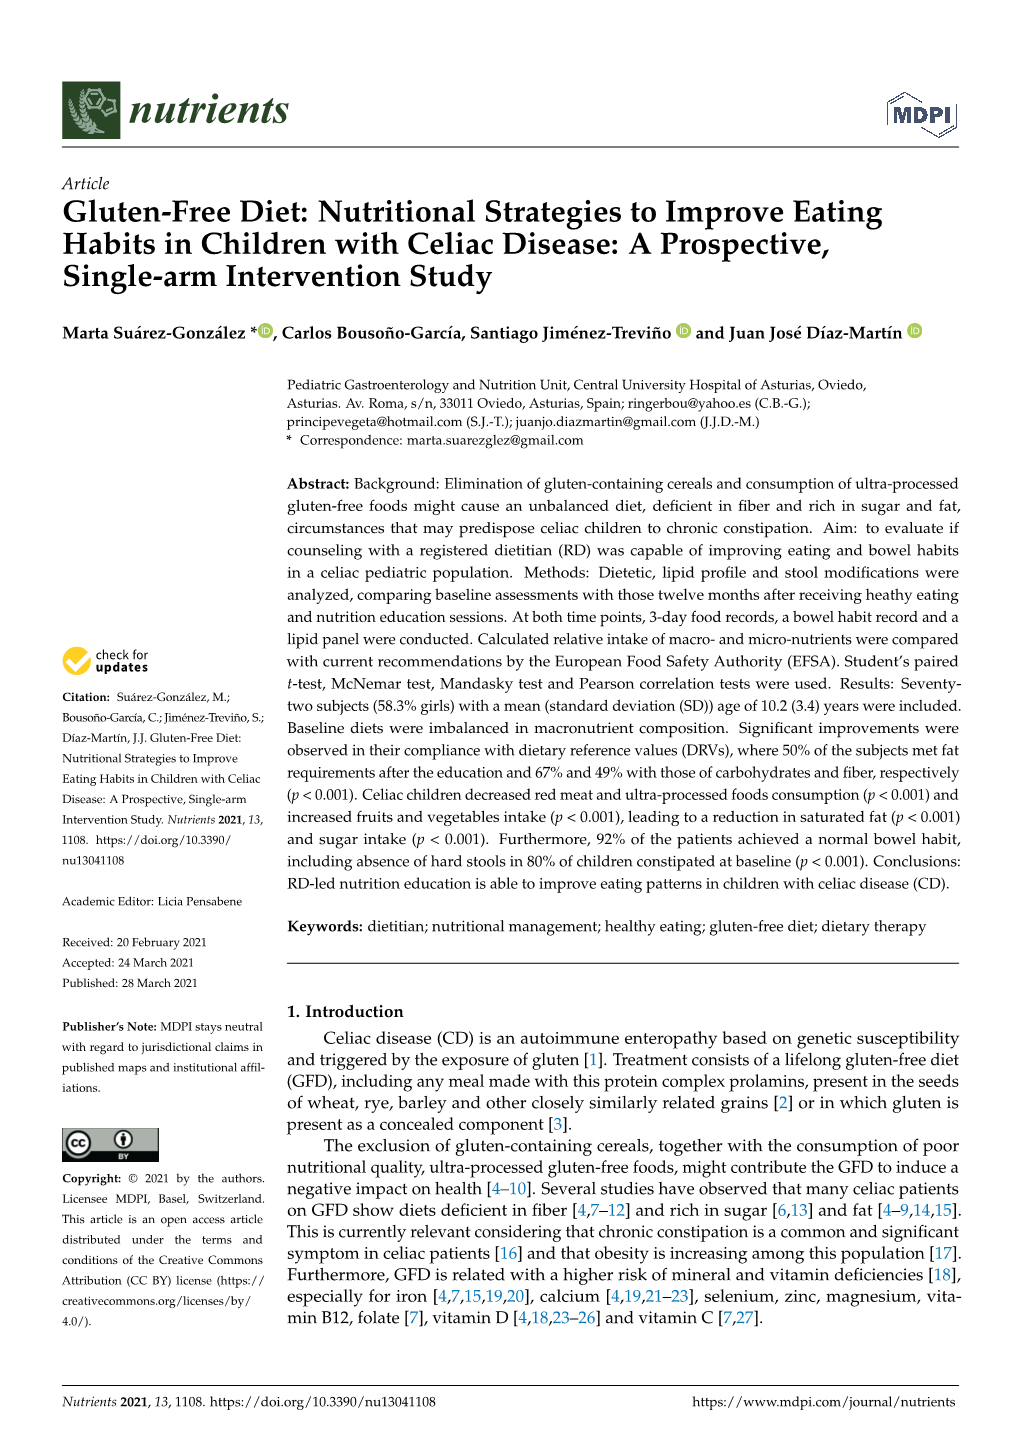 Gluten-Free Diet: Nutritional Strategies to Improve Eating Habits in Children with Celiac Disease: a Prospective, Single-Arm Intervention Study